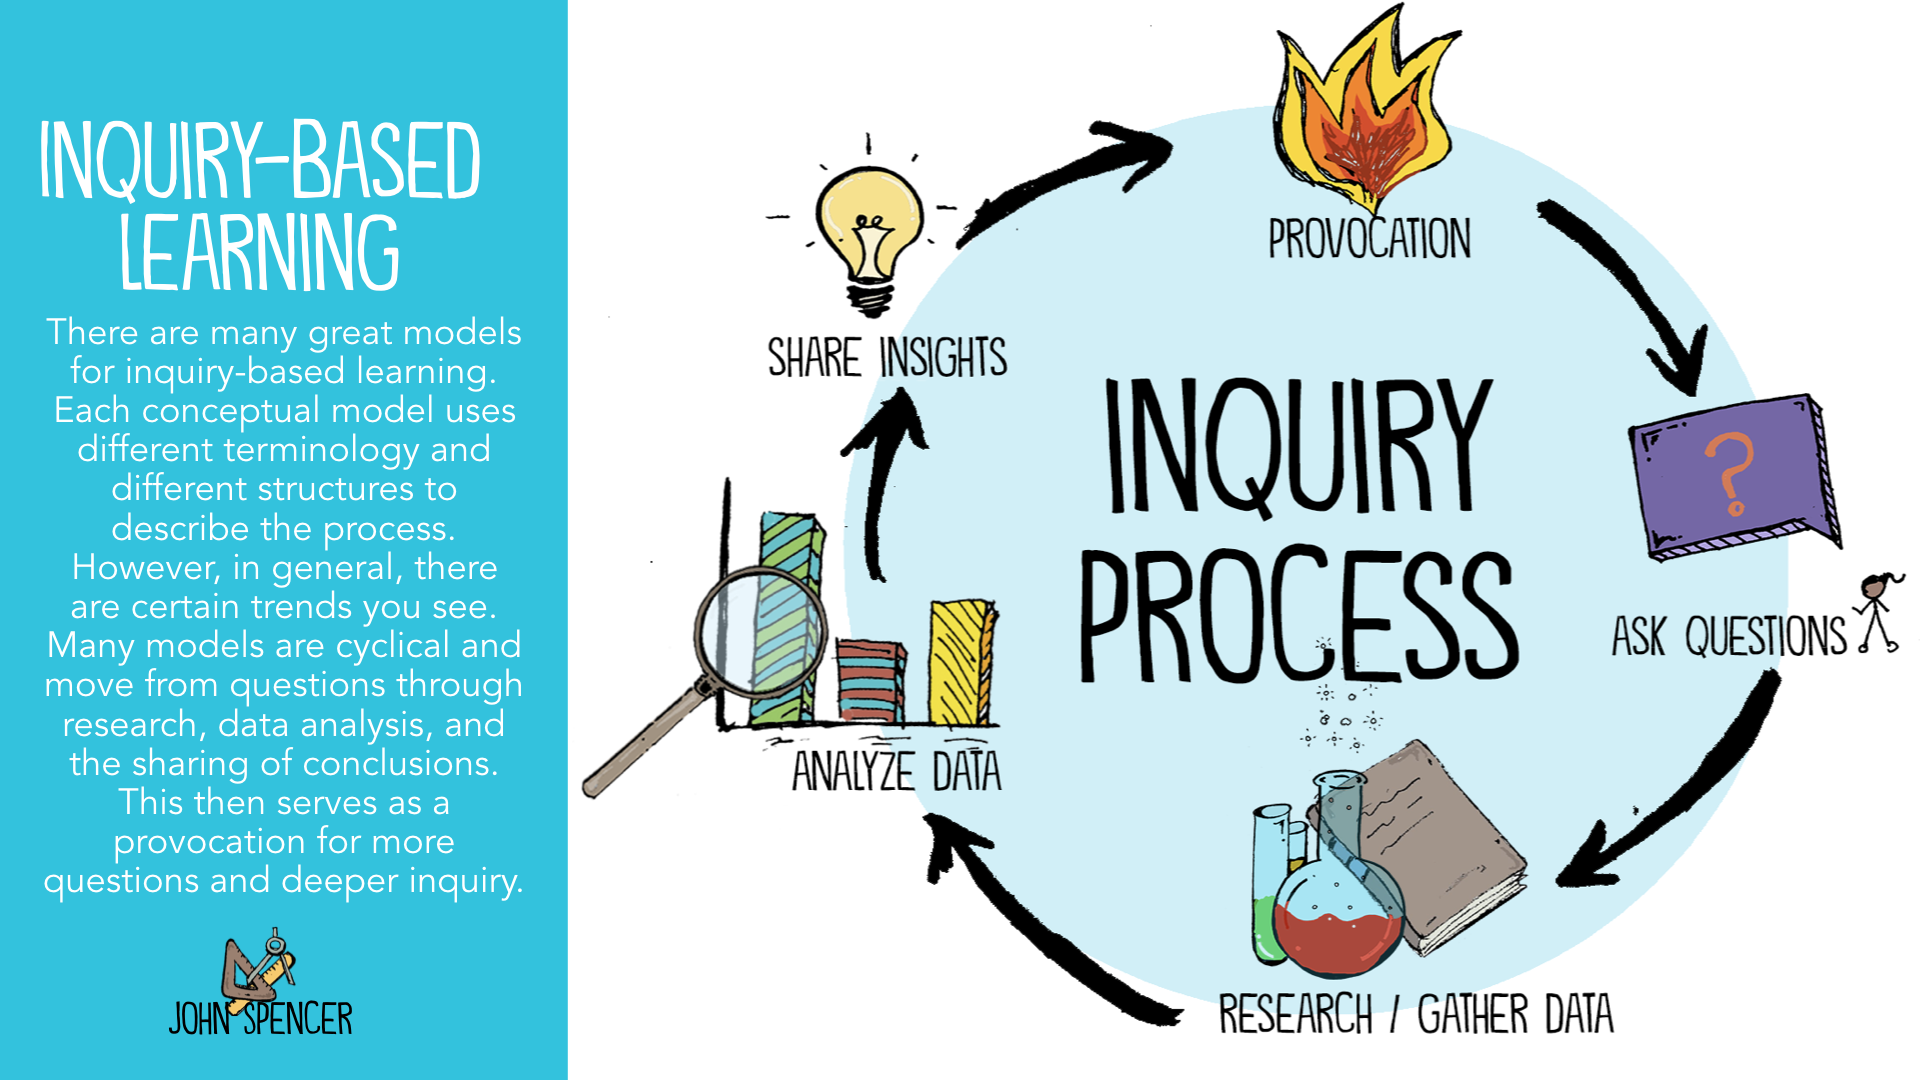 what is critical inquiry in education